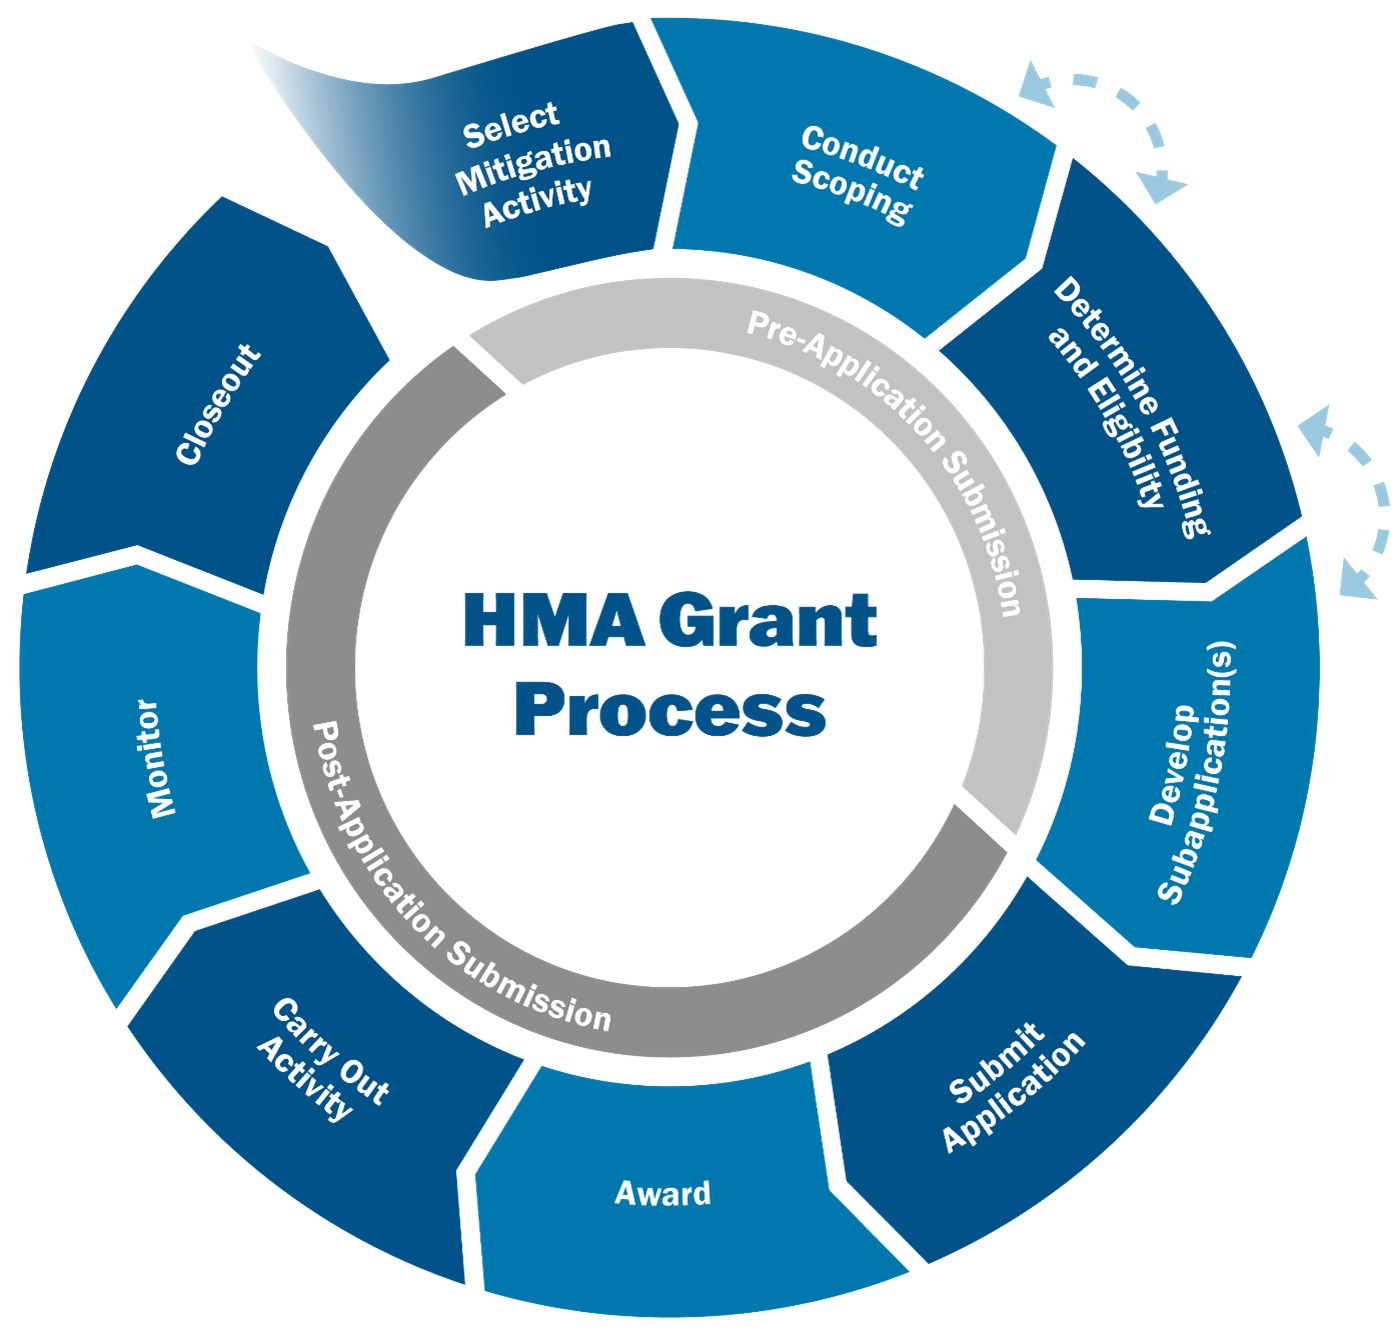 A graphic which portrays the steps in the HMA grant process during the pre-application and post-application submission phases, starting with the selection of a mitigation activity and ending with the closeout.